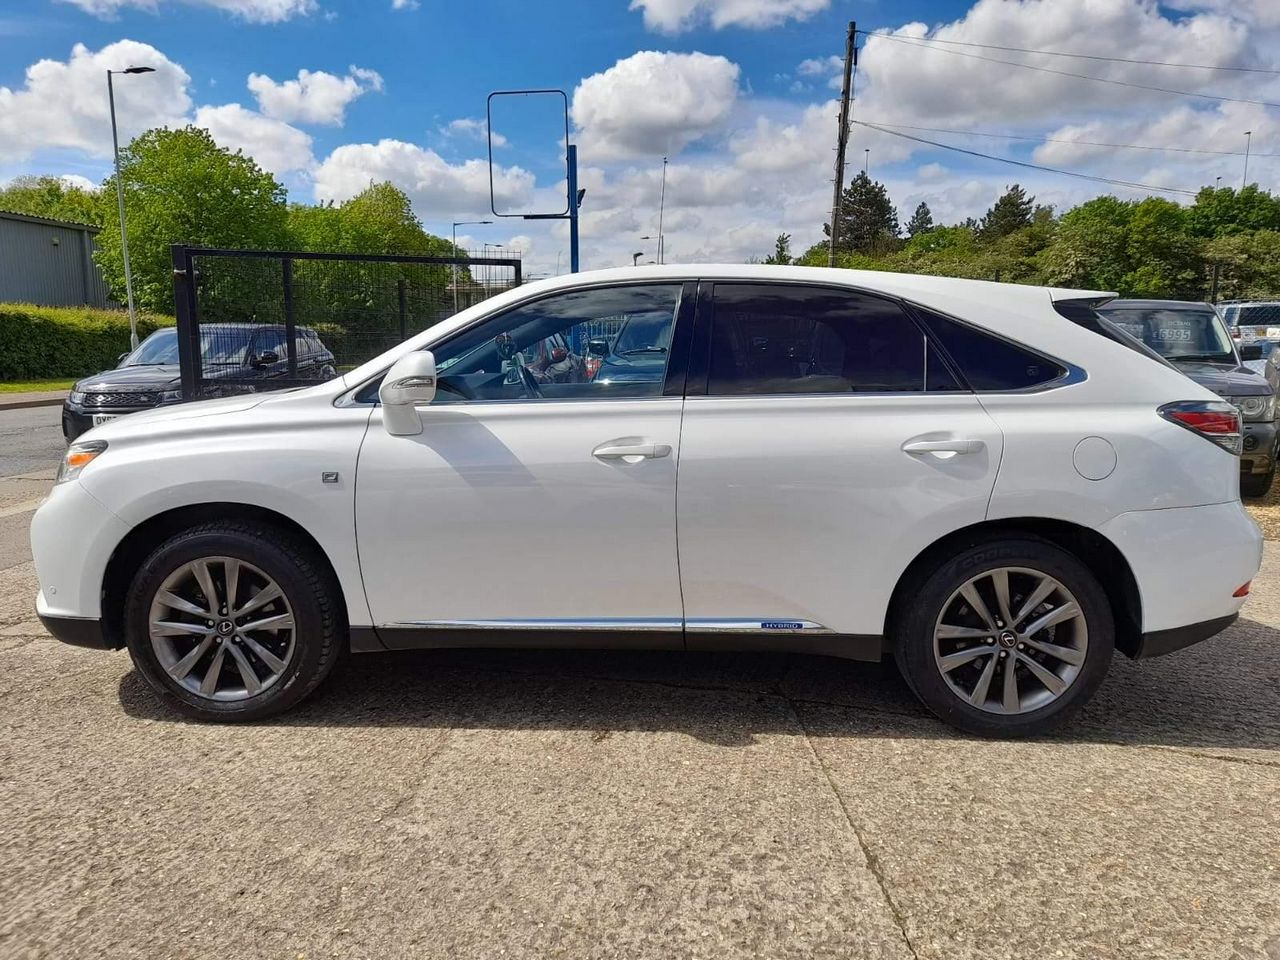 2013 Lexus RX 3.5 450h V6 F Sport SUV 5dr Petrol Hybrid CVT 4WD Euro 5 (s/s) (299 ps) - Picture 6 of 53